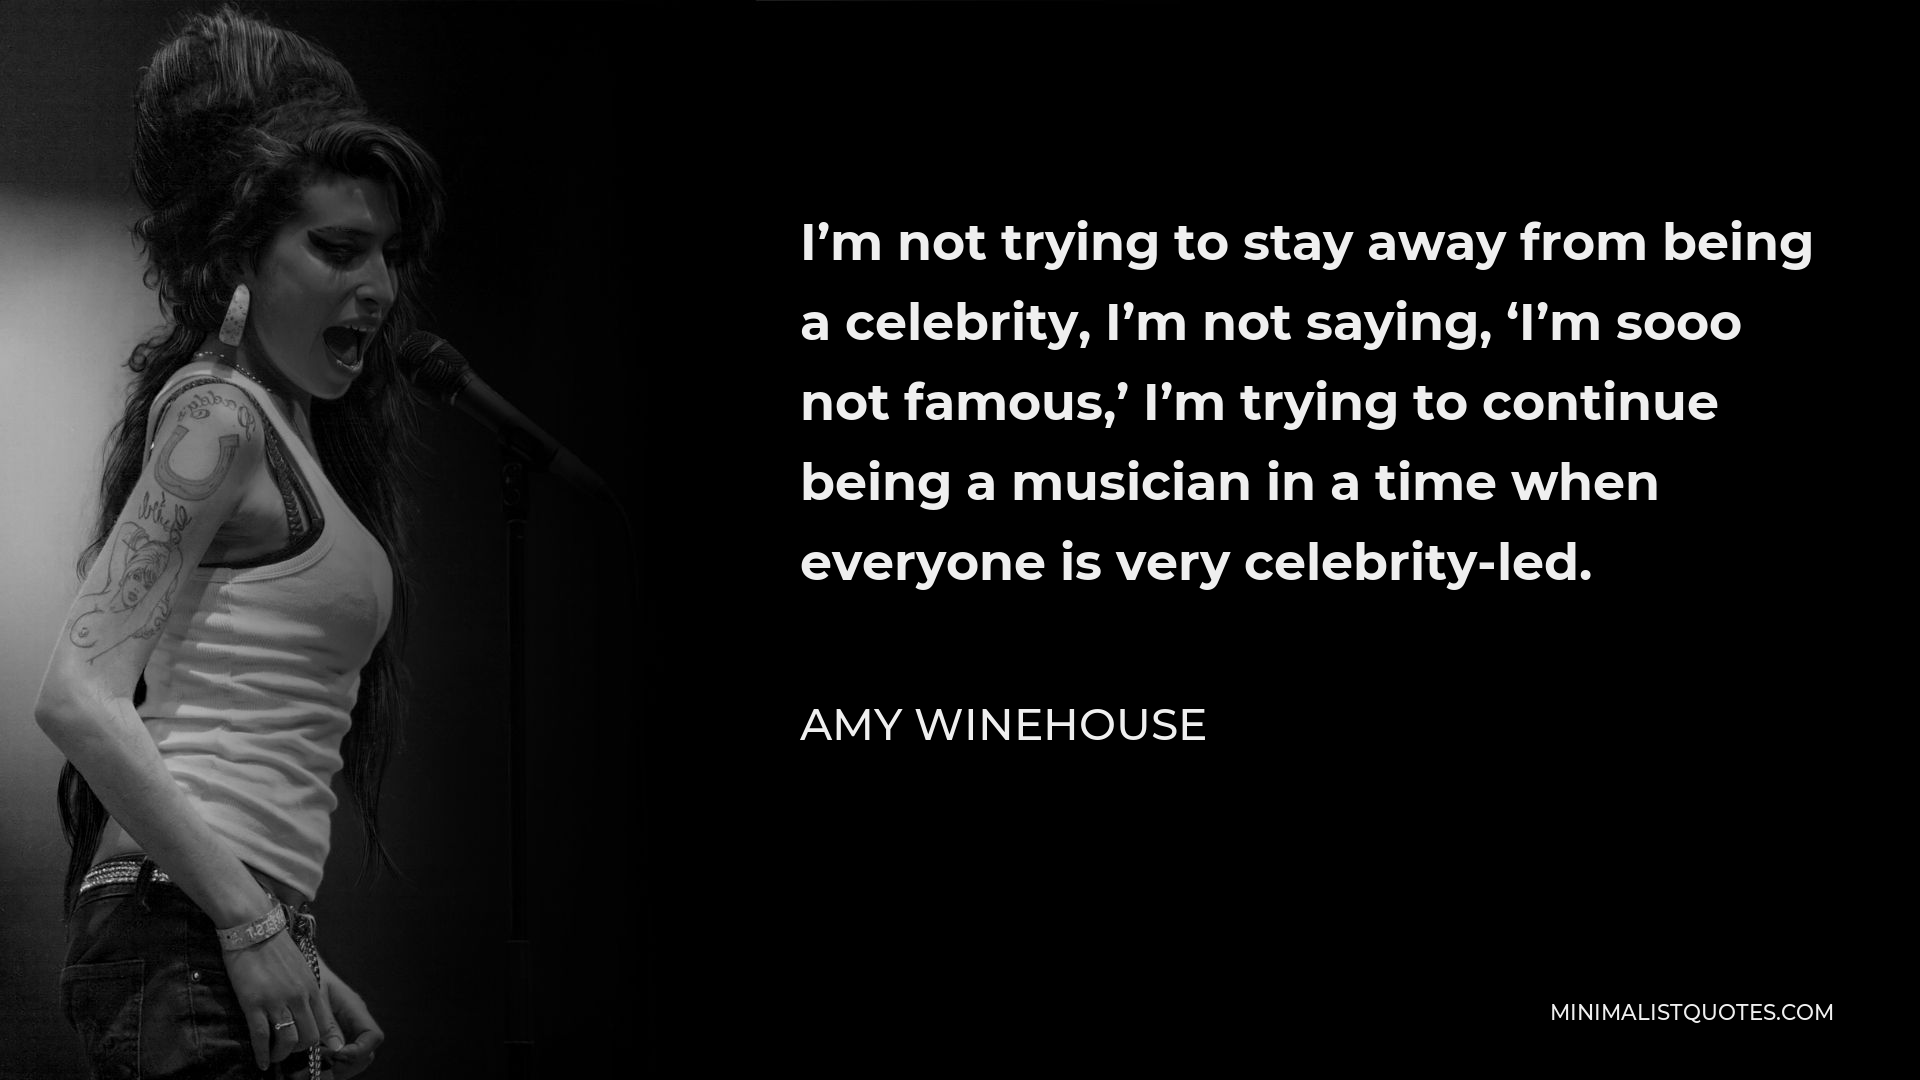 Amy Winehouse Quote: I'm not trying to stay away from being a celebrity ...